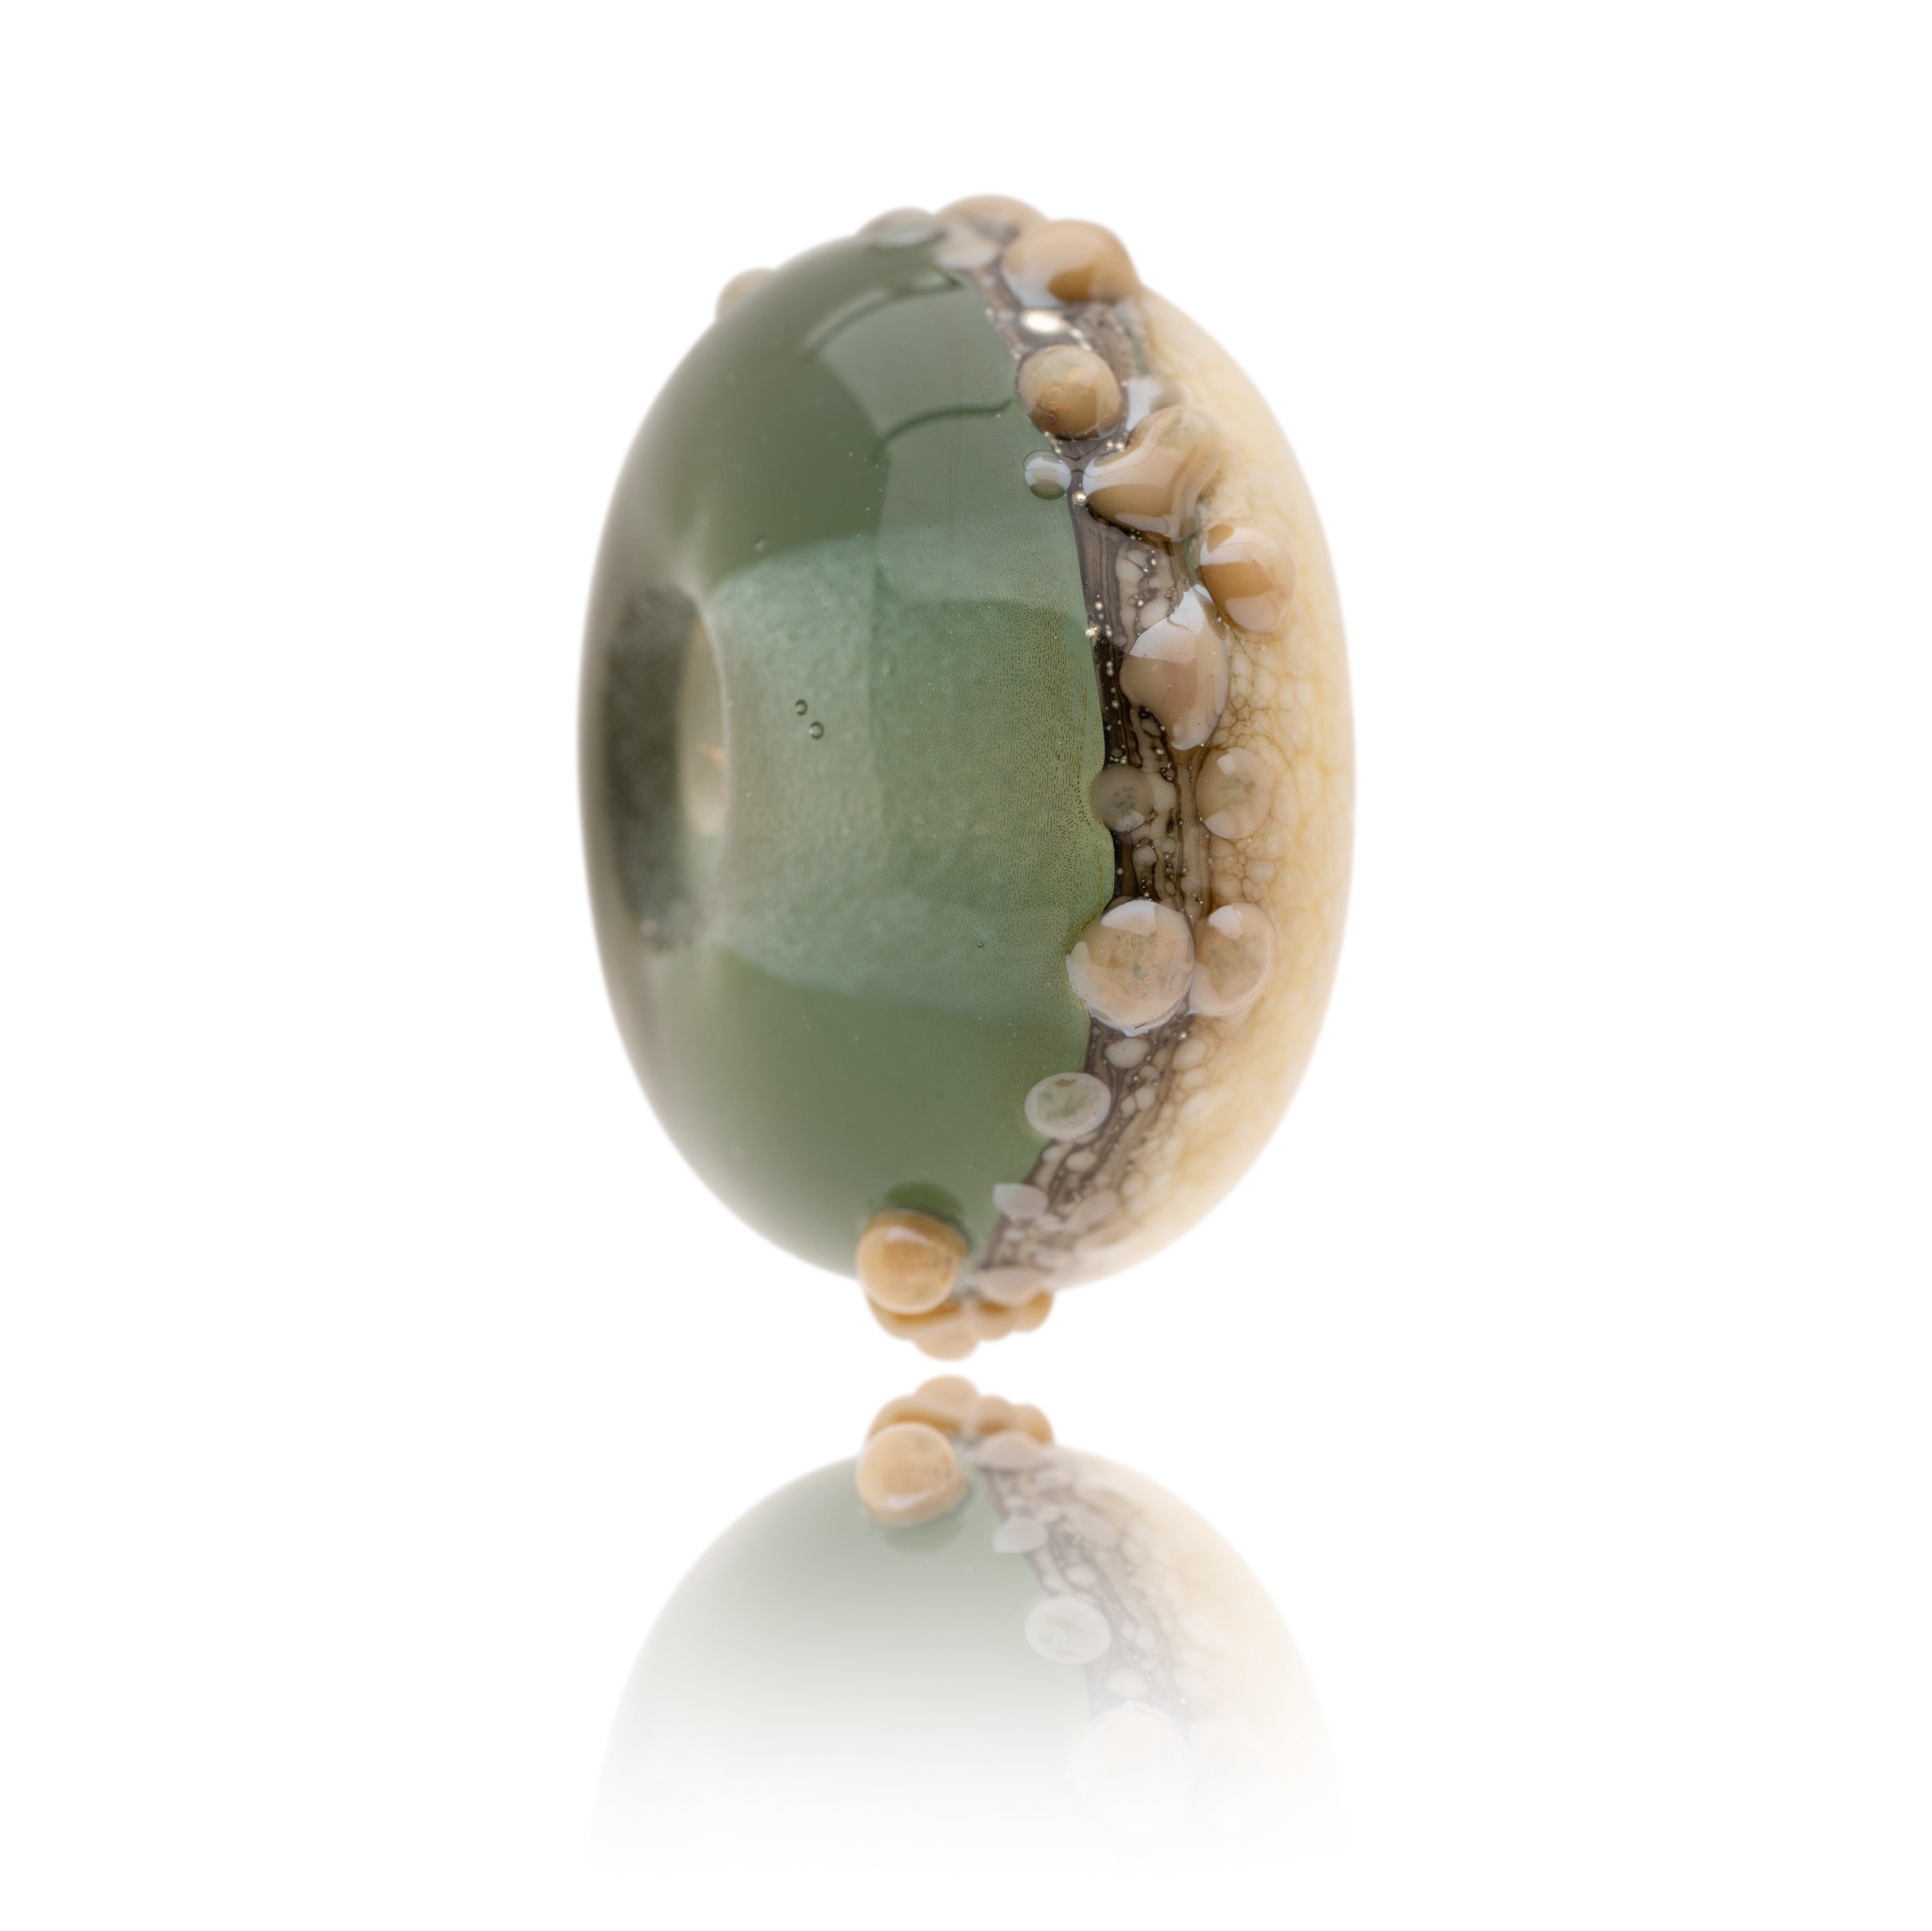 Green and ivory glass bead decorated with raised dots of brown glass, representing Worthing Beach in Sussex.